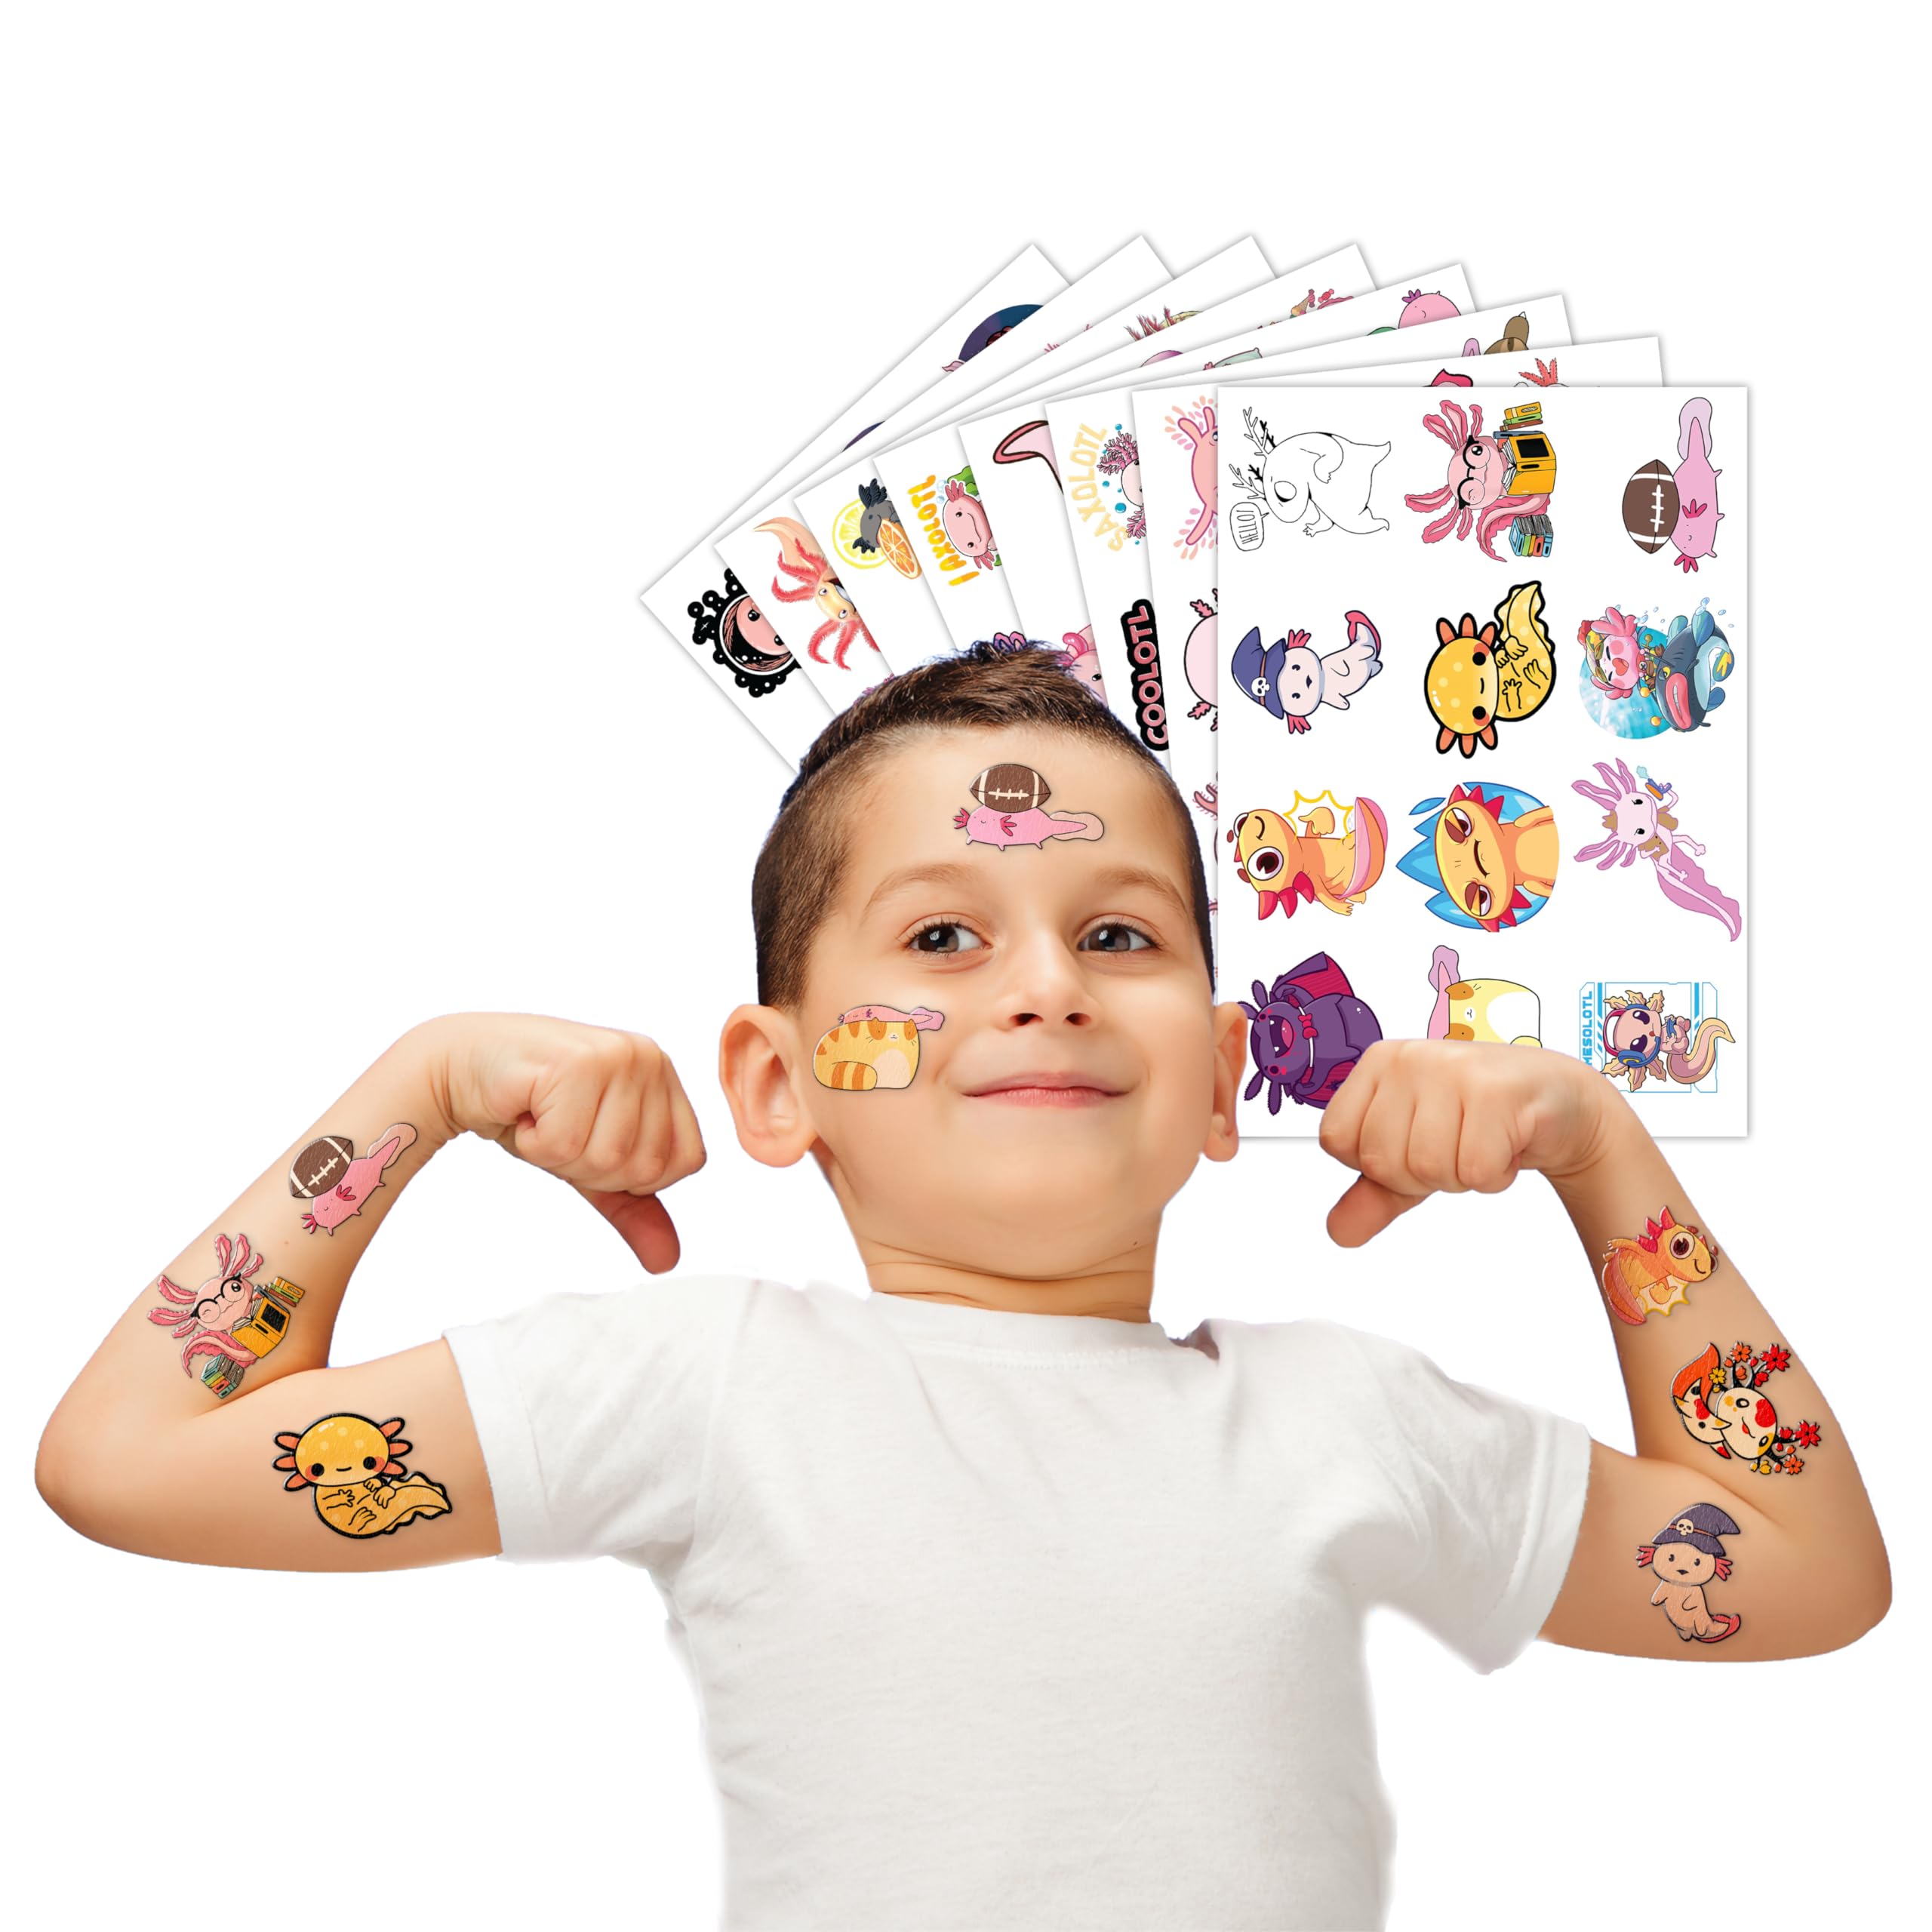 Axolotl Temporary Tattoos Stickers 96PCS Birthday Party Supplies Decorations Fake Tattoos Stickers Super Cute Party Favors for Kids Girls Boys Rewards Gifts Classroom School Prizes Themed